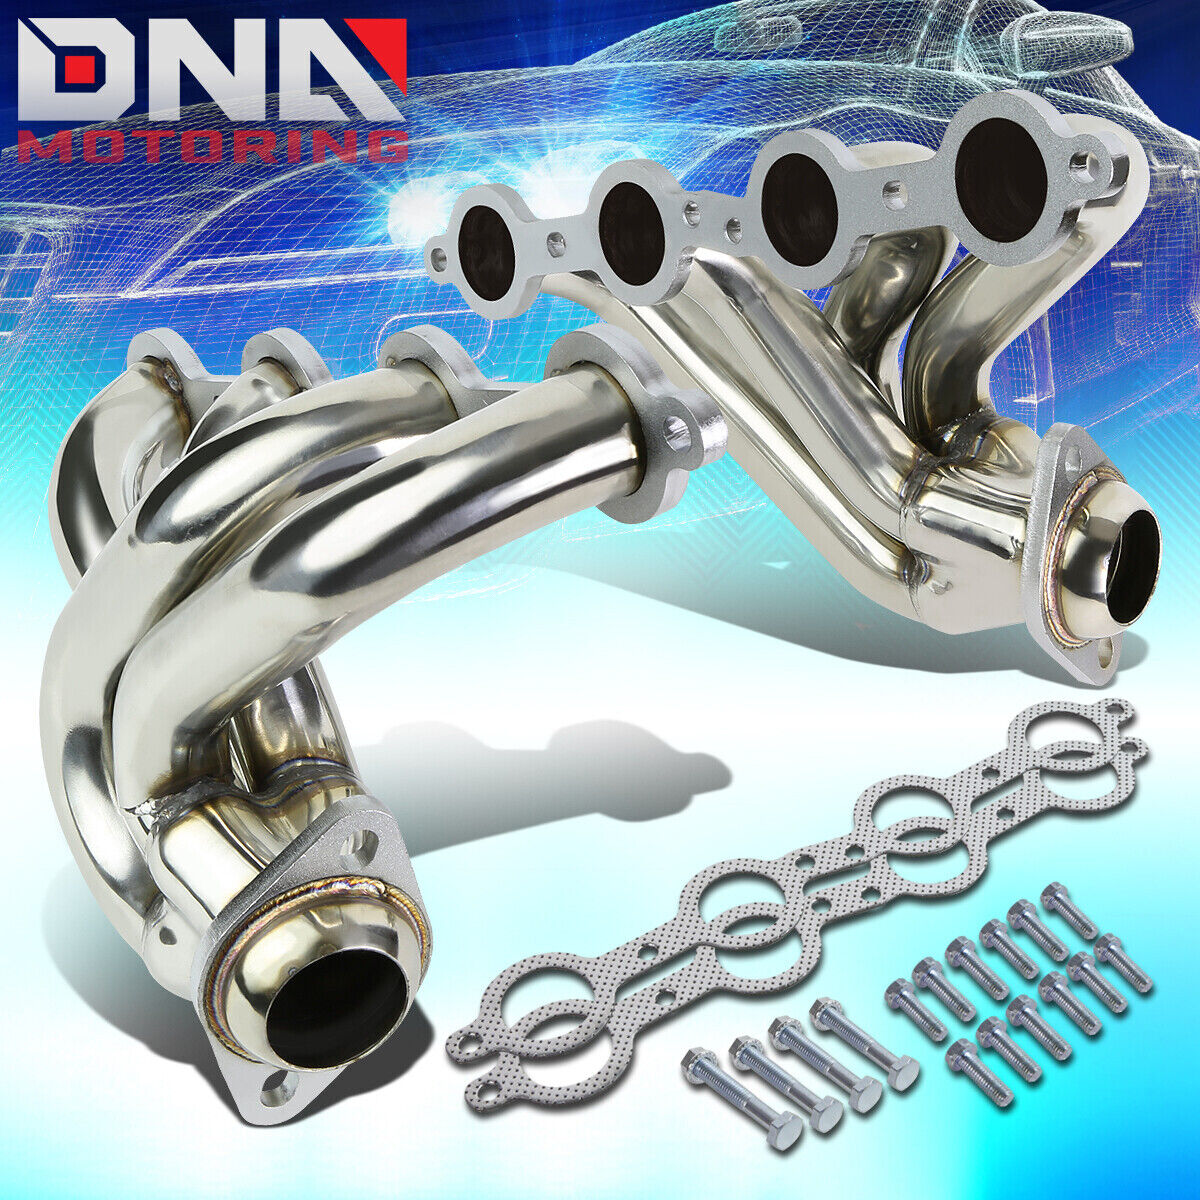 FOR 04-06 PONTIAC GTO 5.7/6.0 V8 STAINLESS PERFORMANCE HEADER EXHAUST MANIFOLD